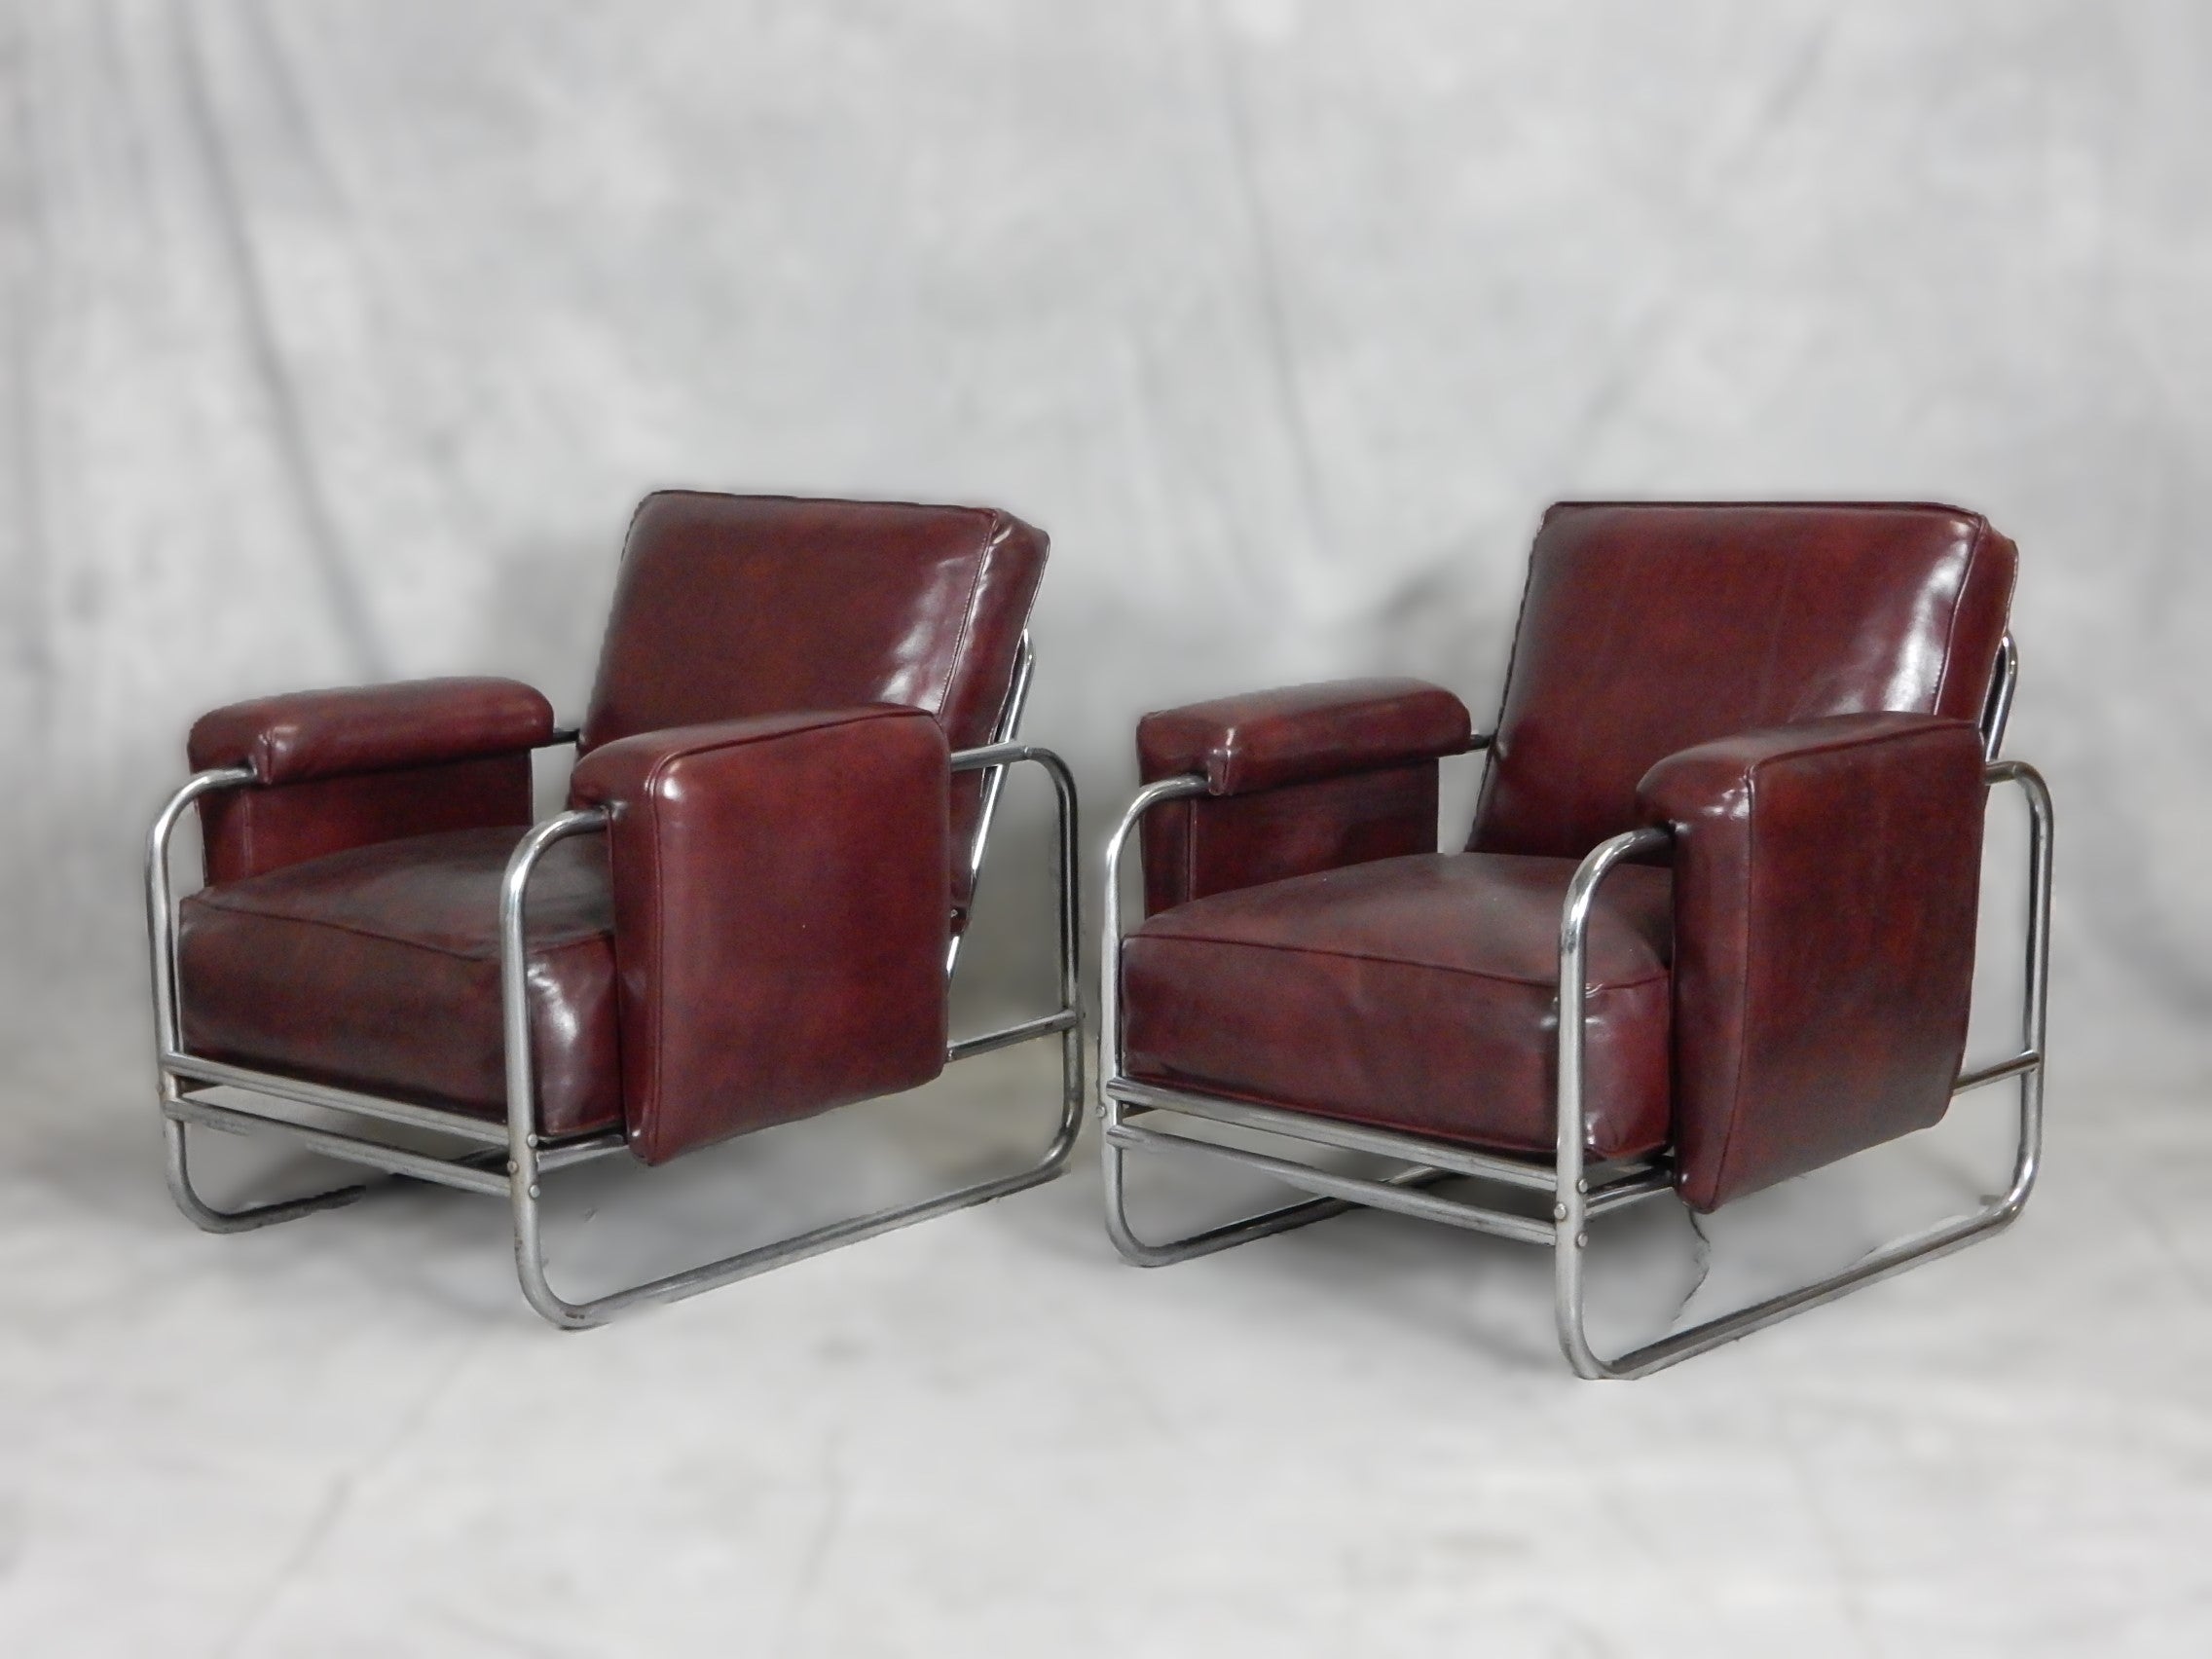 Nickel plated tubular steel lounge chairs with large Naugahyde upholstered cushions. These are built like tanks and extremely comfortable.
Upholstery and inner springs are in excellent condition. 
Frames are solid but do show pitting and rust in